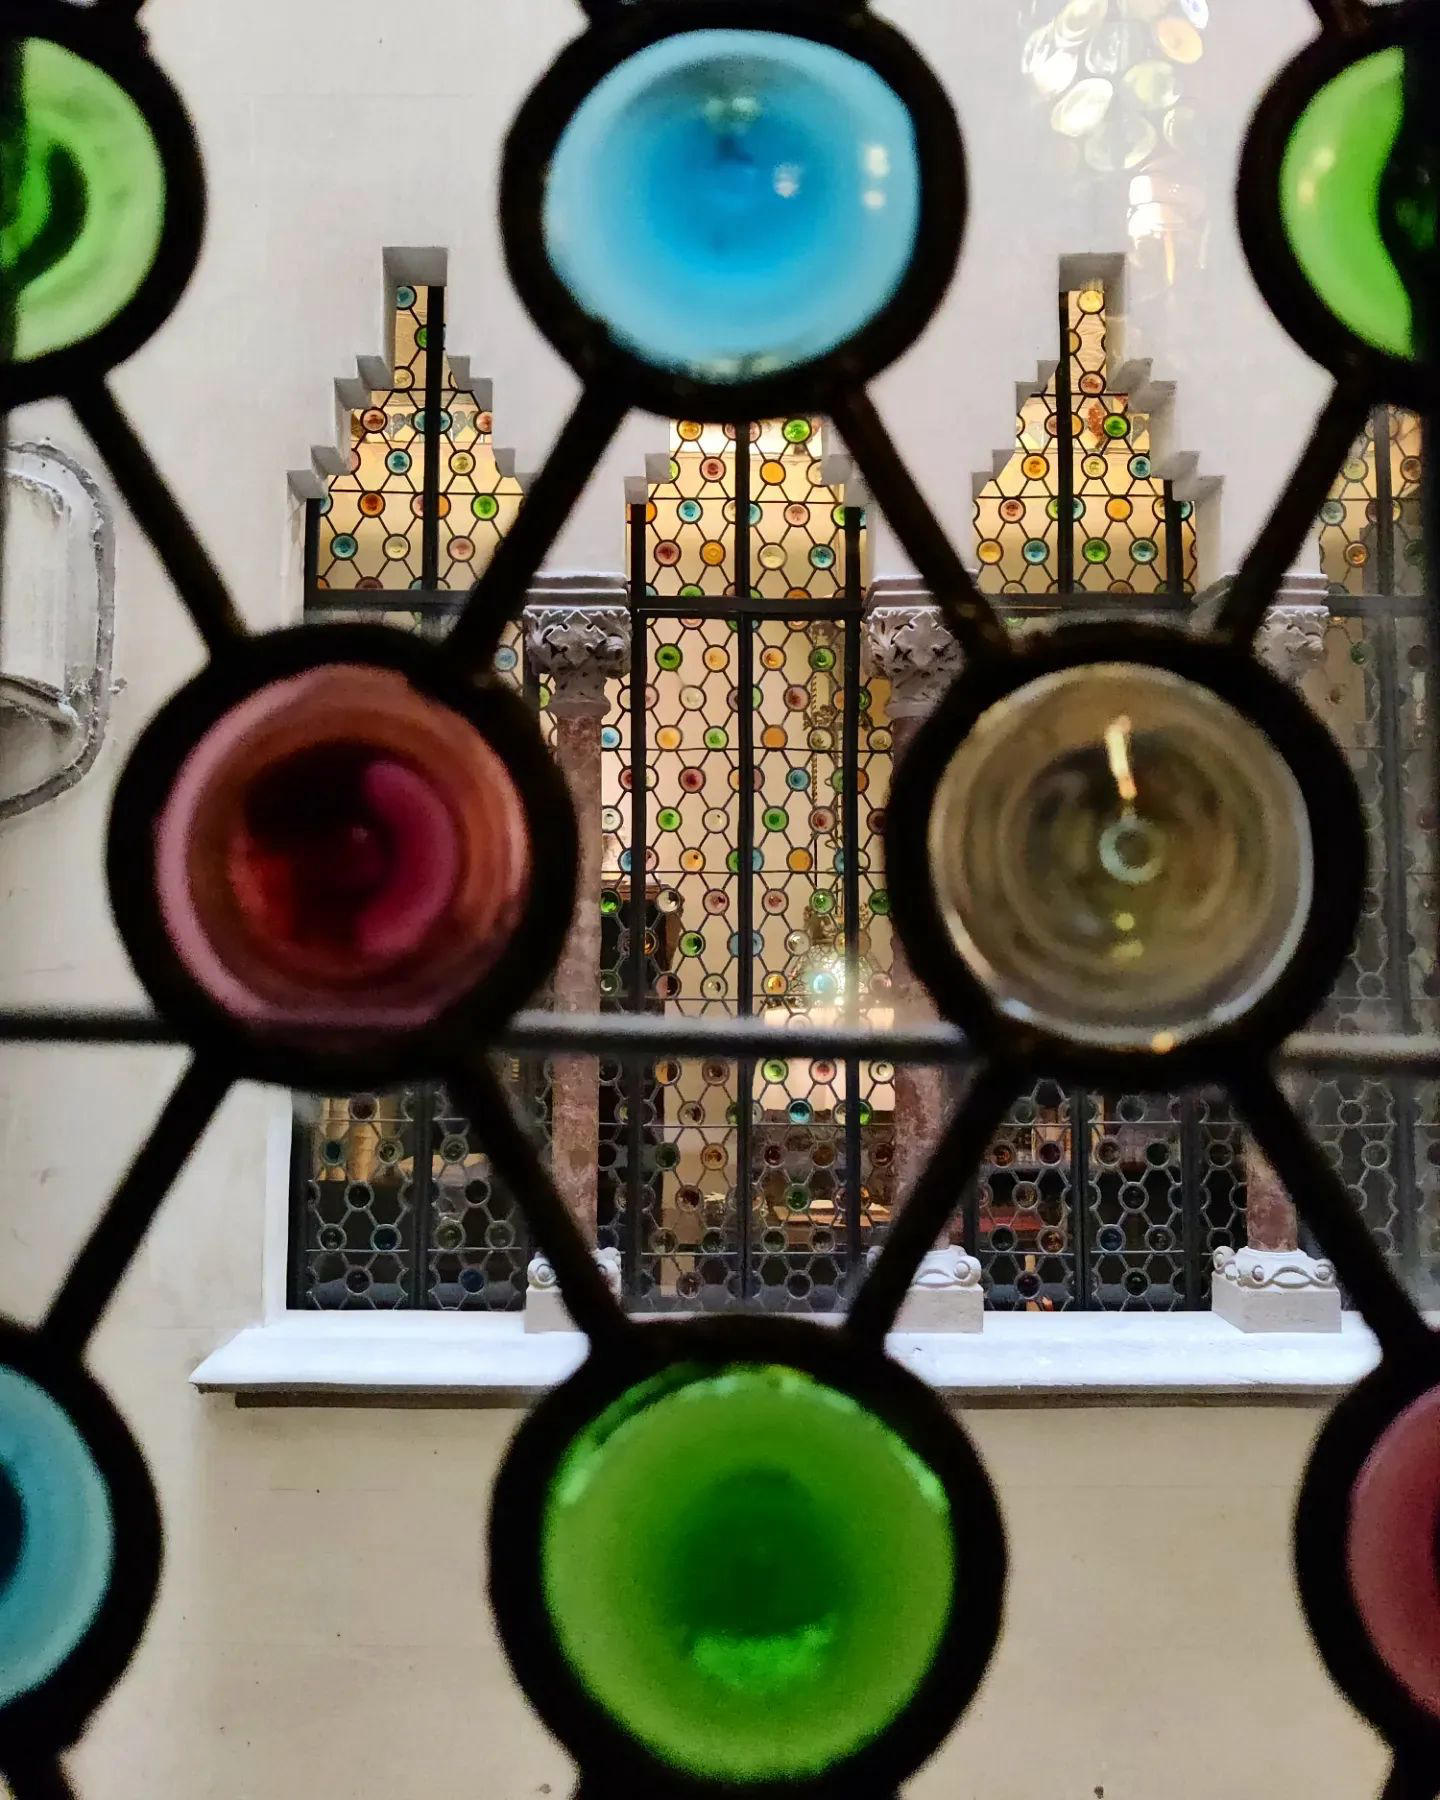 #casamuseuamatller and its stained-glass windows